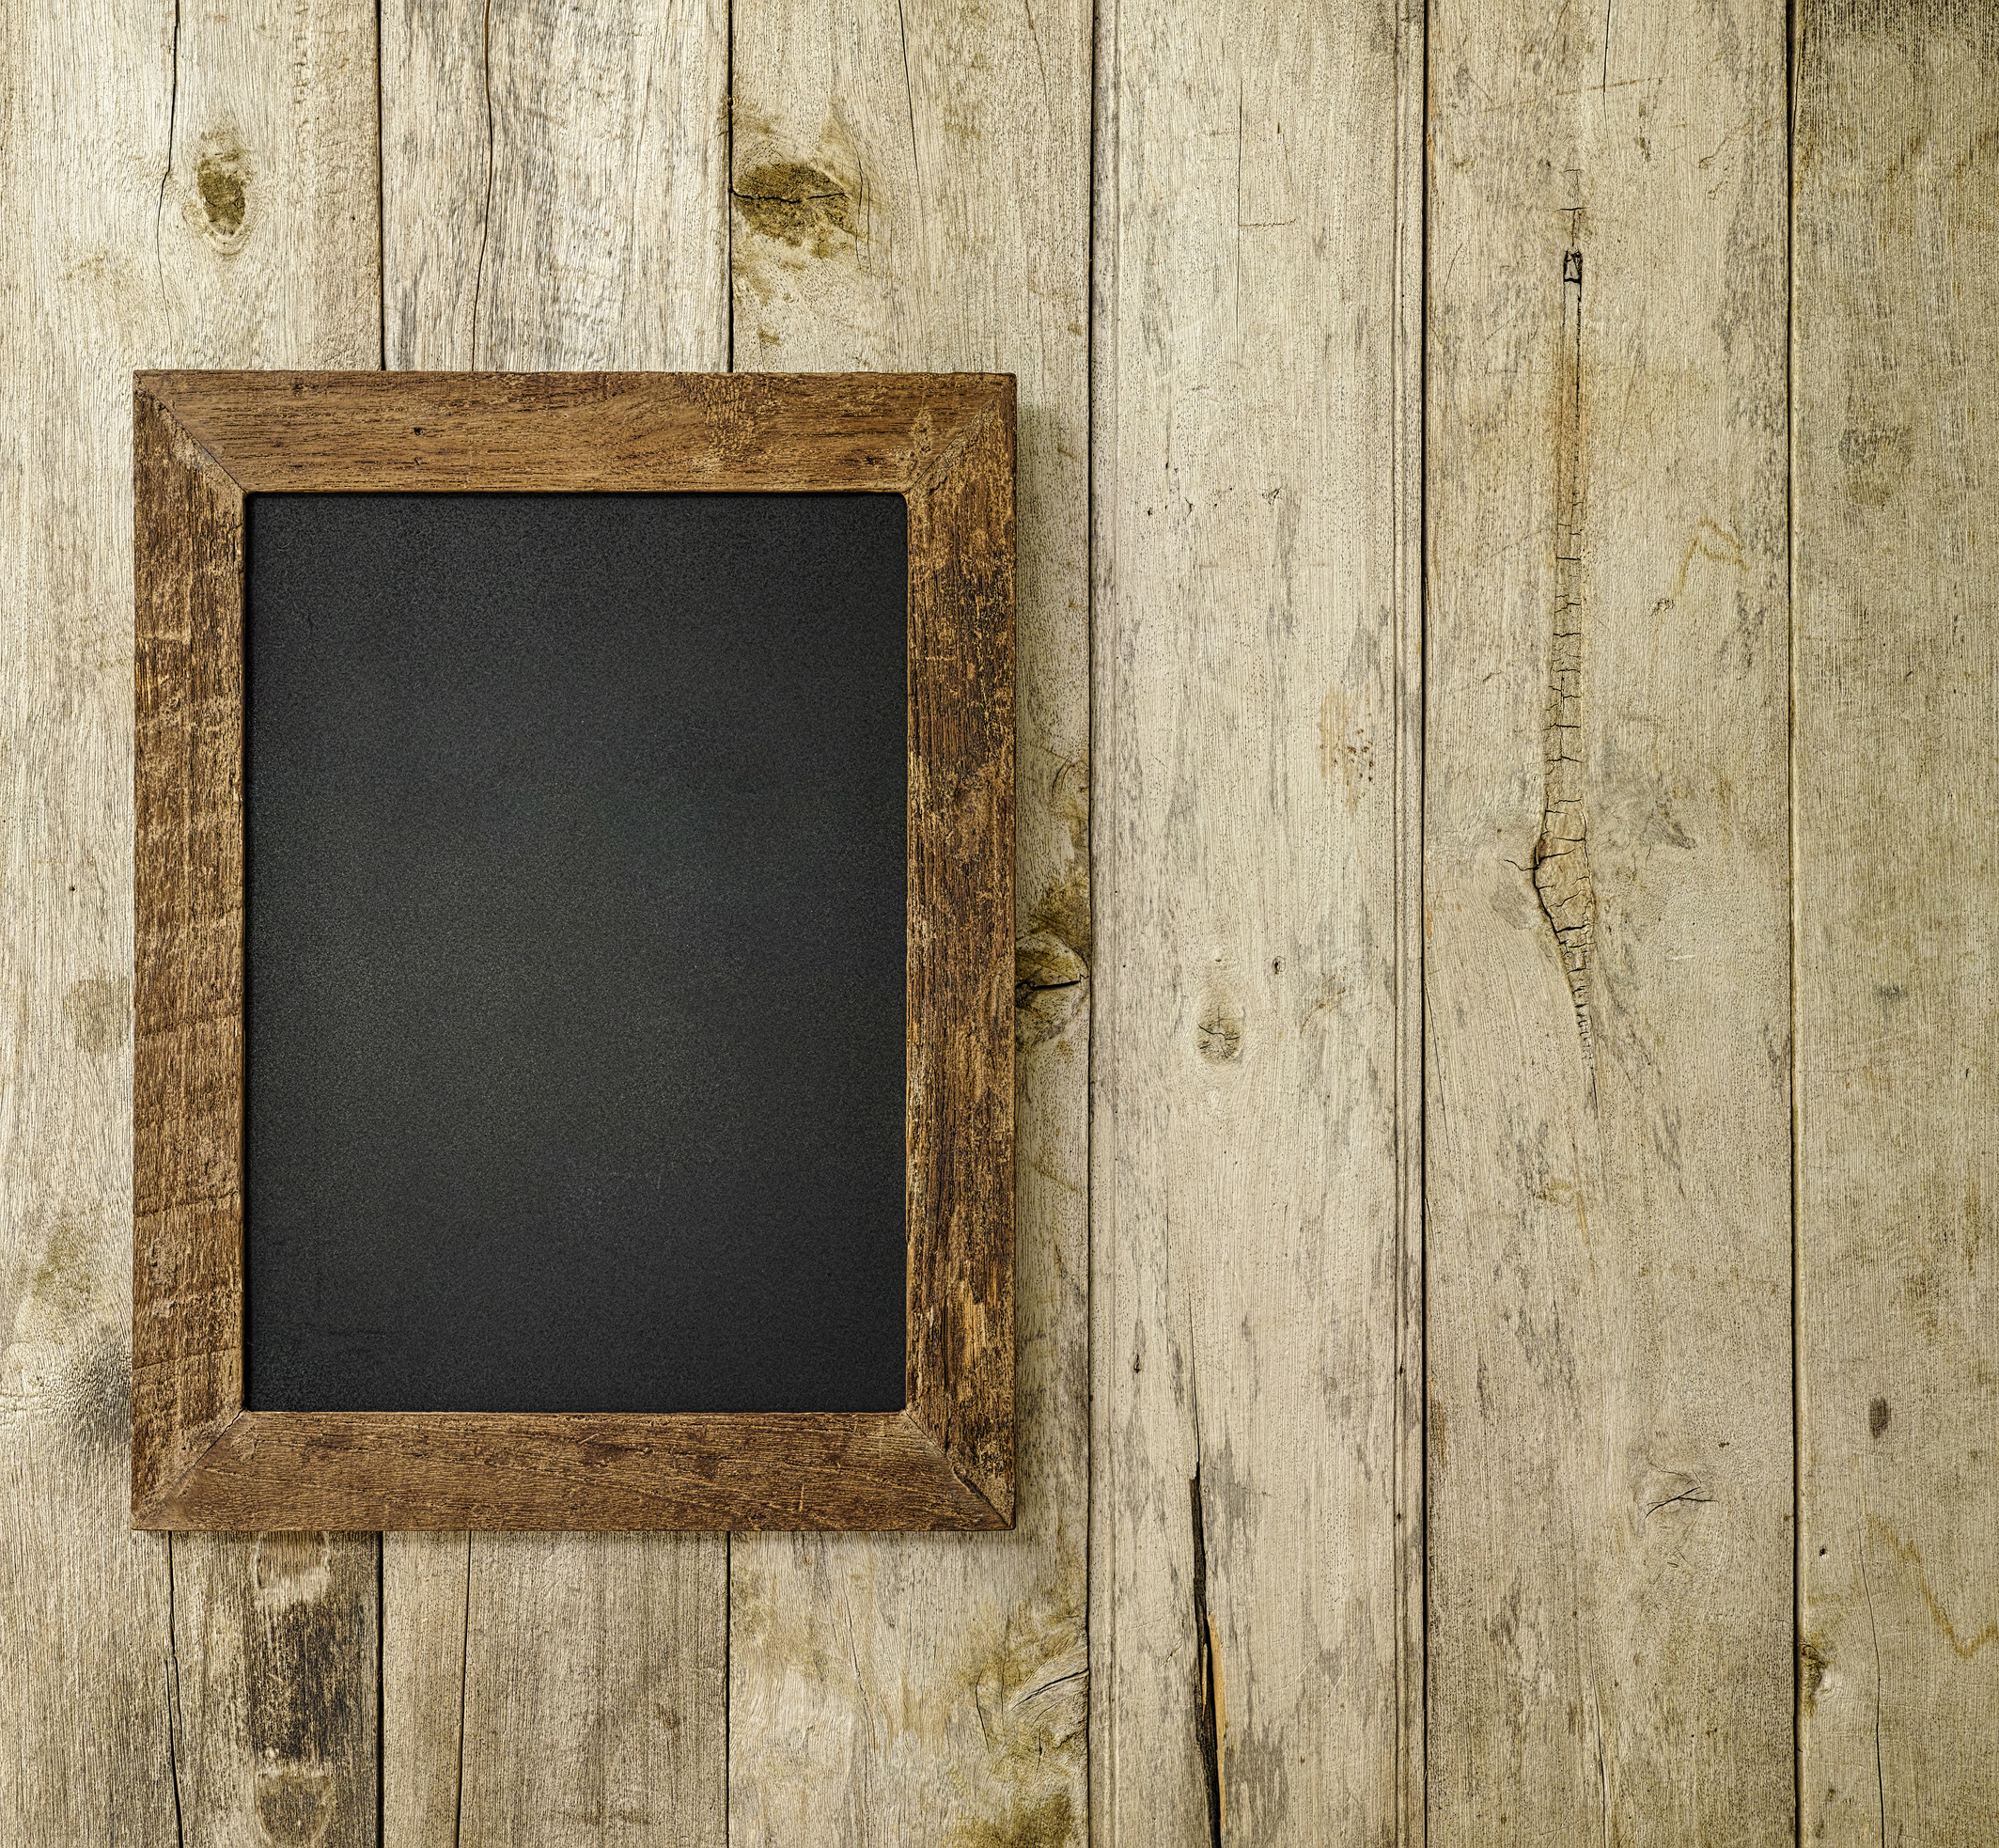 An old wooden framed blackboard on an old weathered wooden plank wall background.